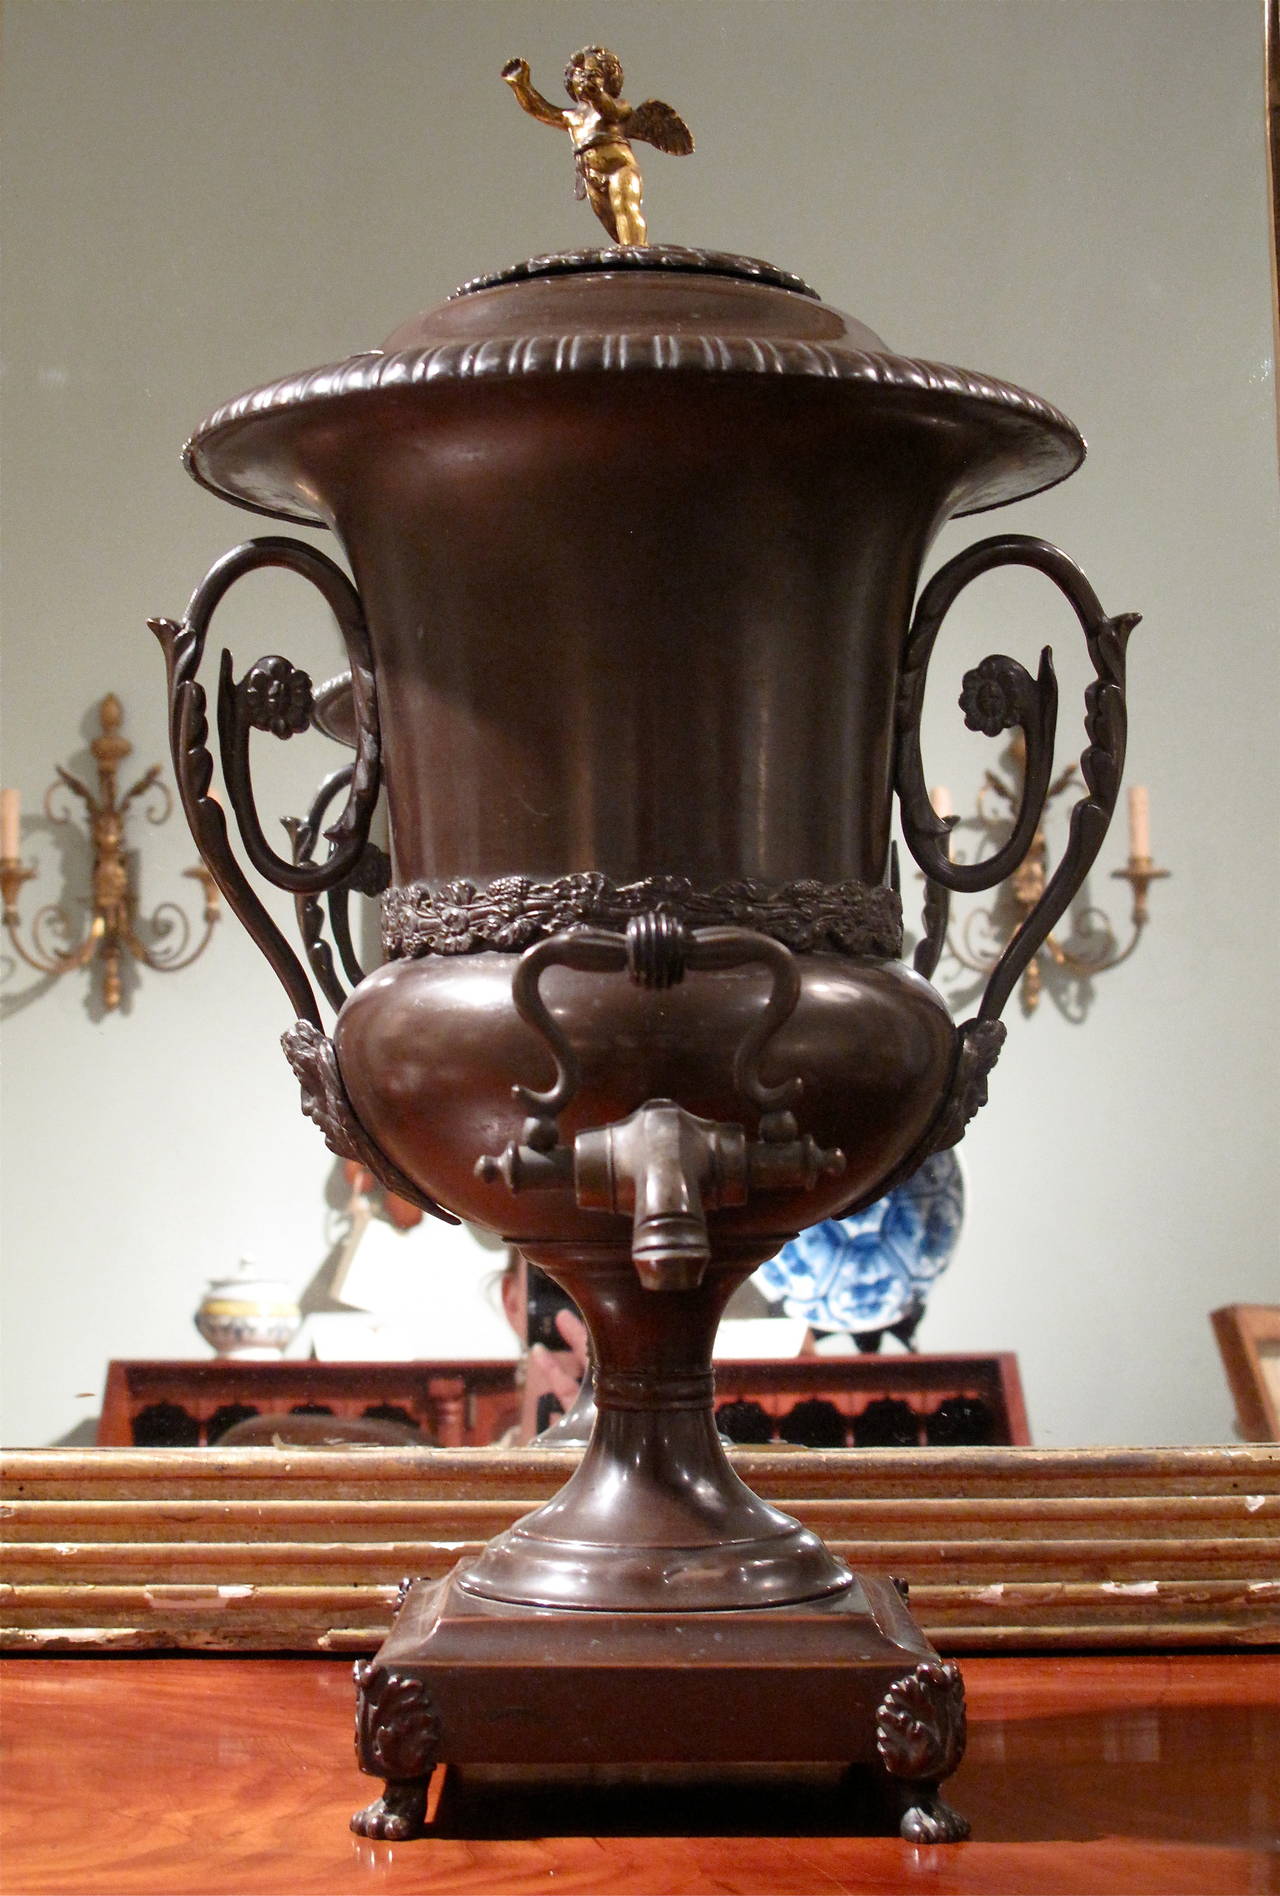 A very fine ca. 1810 footed hot water urn of patinated copper, with wonderful sculptural details. A gilded putto serves as the handle for the two part lid.